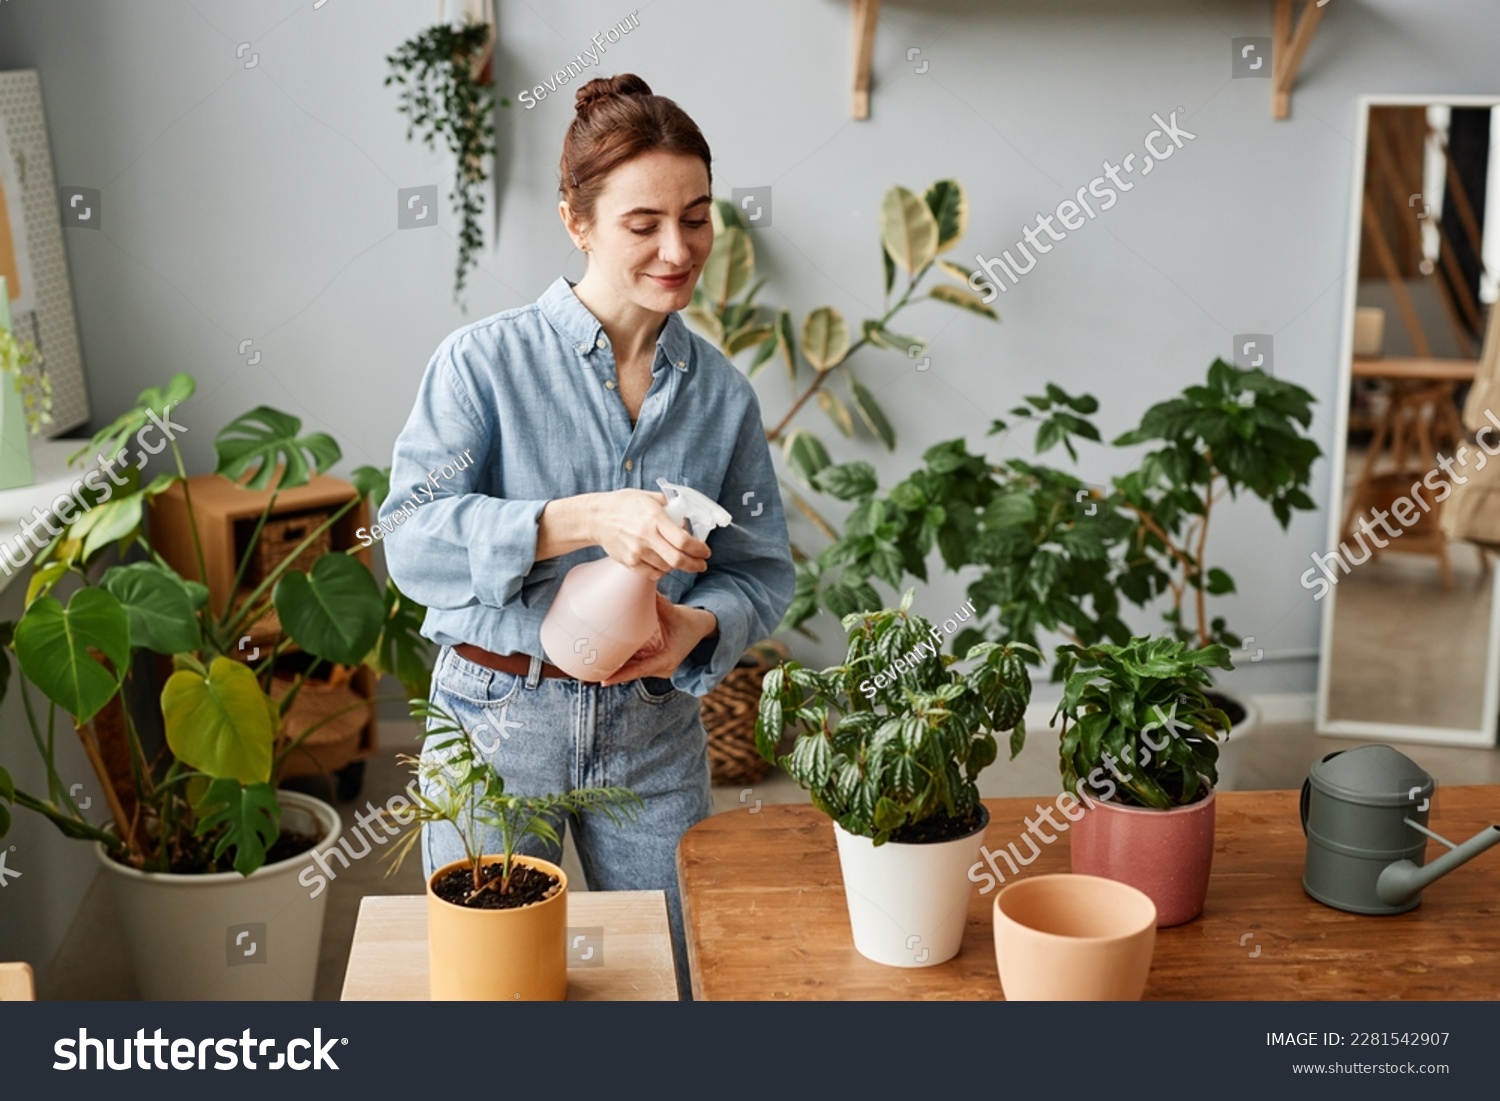 Portrait of smiling young woman watering plants indoors and caring for home greenery, copy space #2281542907